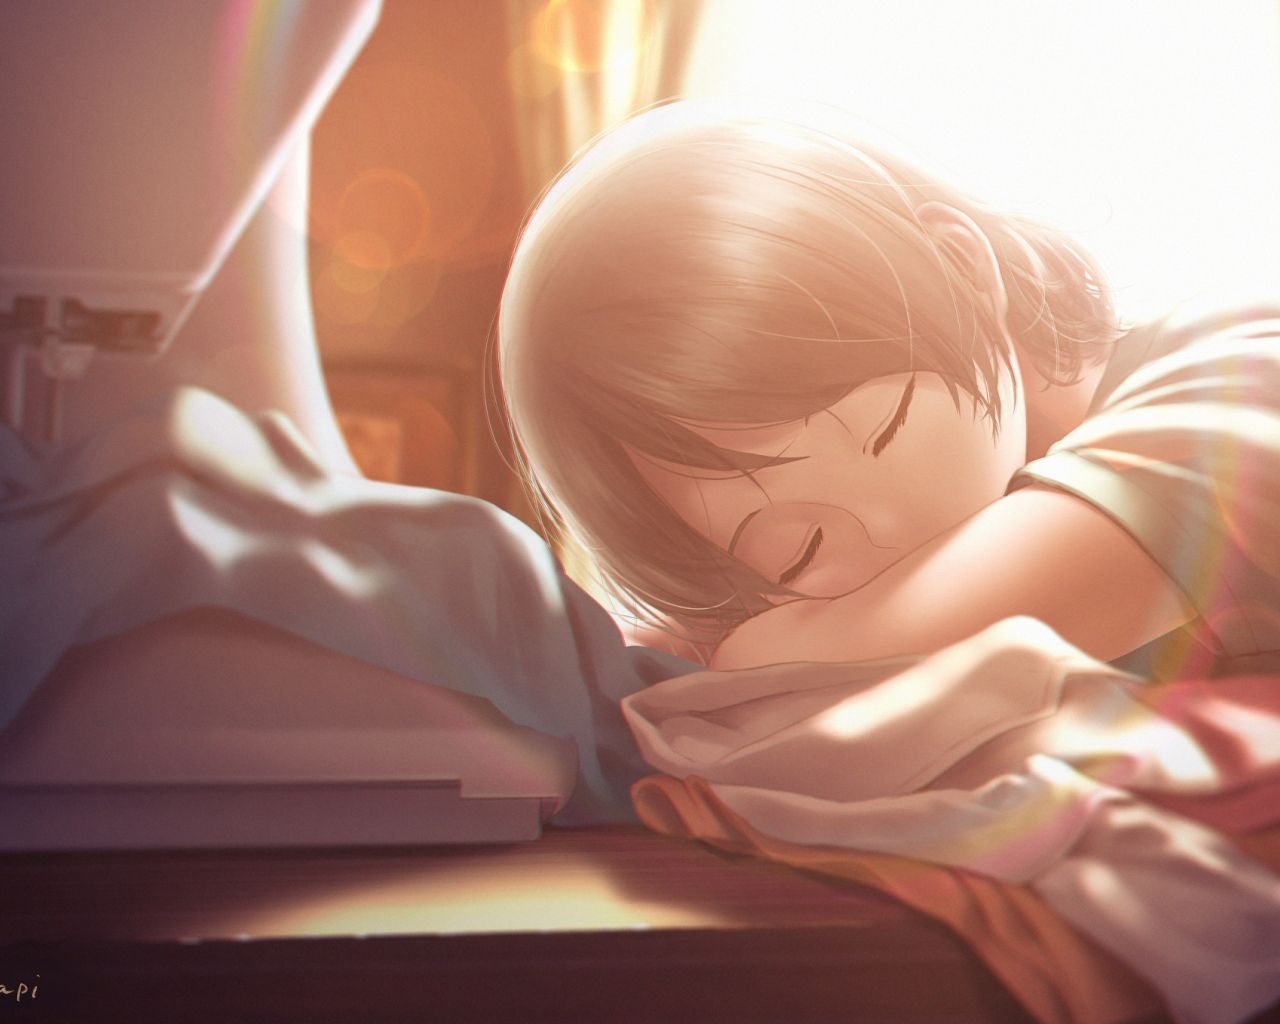 a cute anime girl sleeping in a messy room wlop  Stable Diffusion   OpenArt